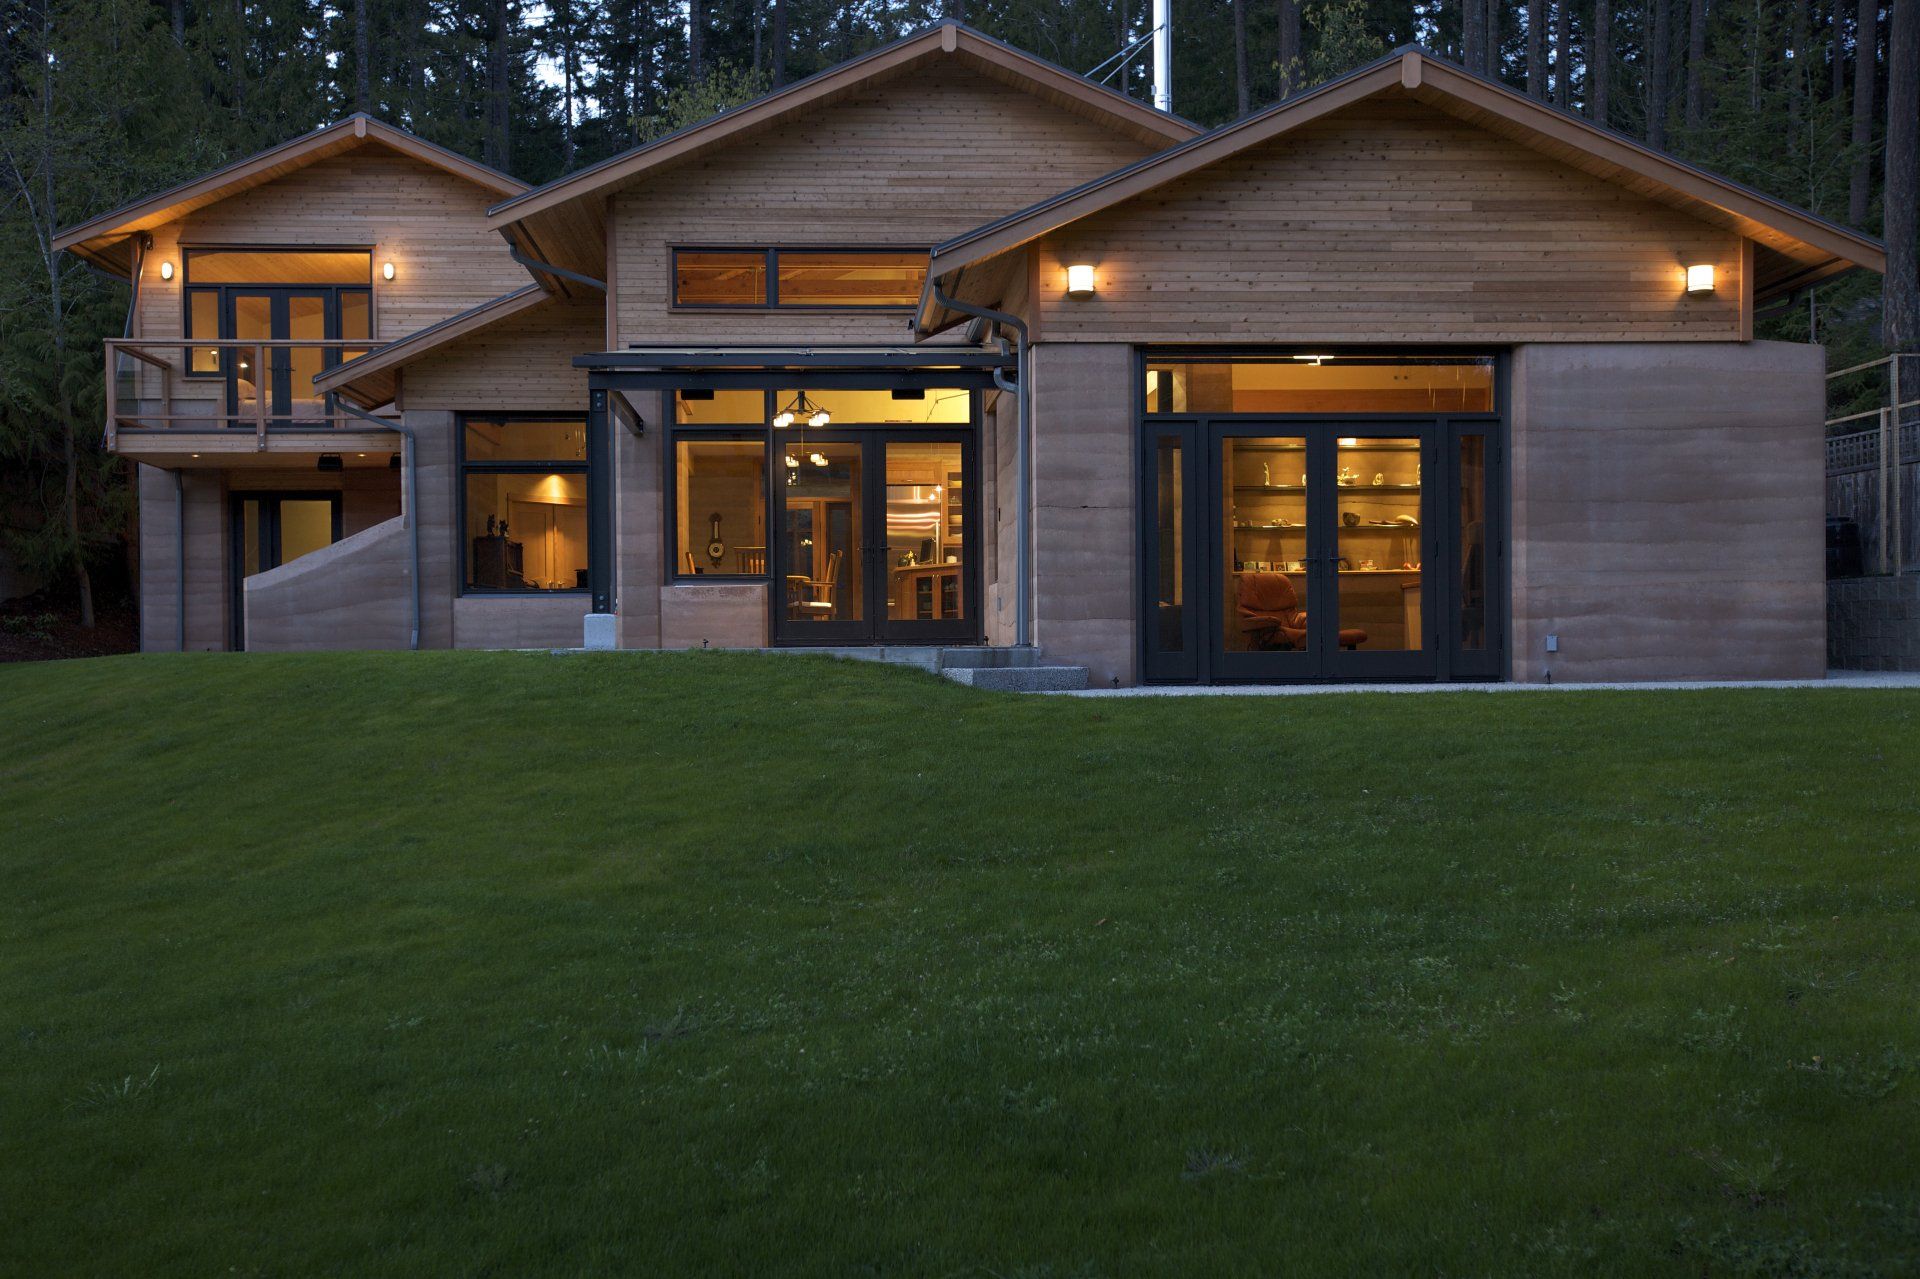 rammed earth home at dusk with lights on and green grassy hill